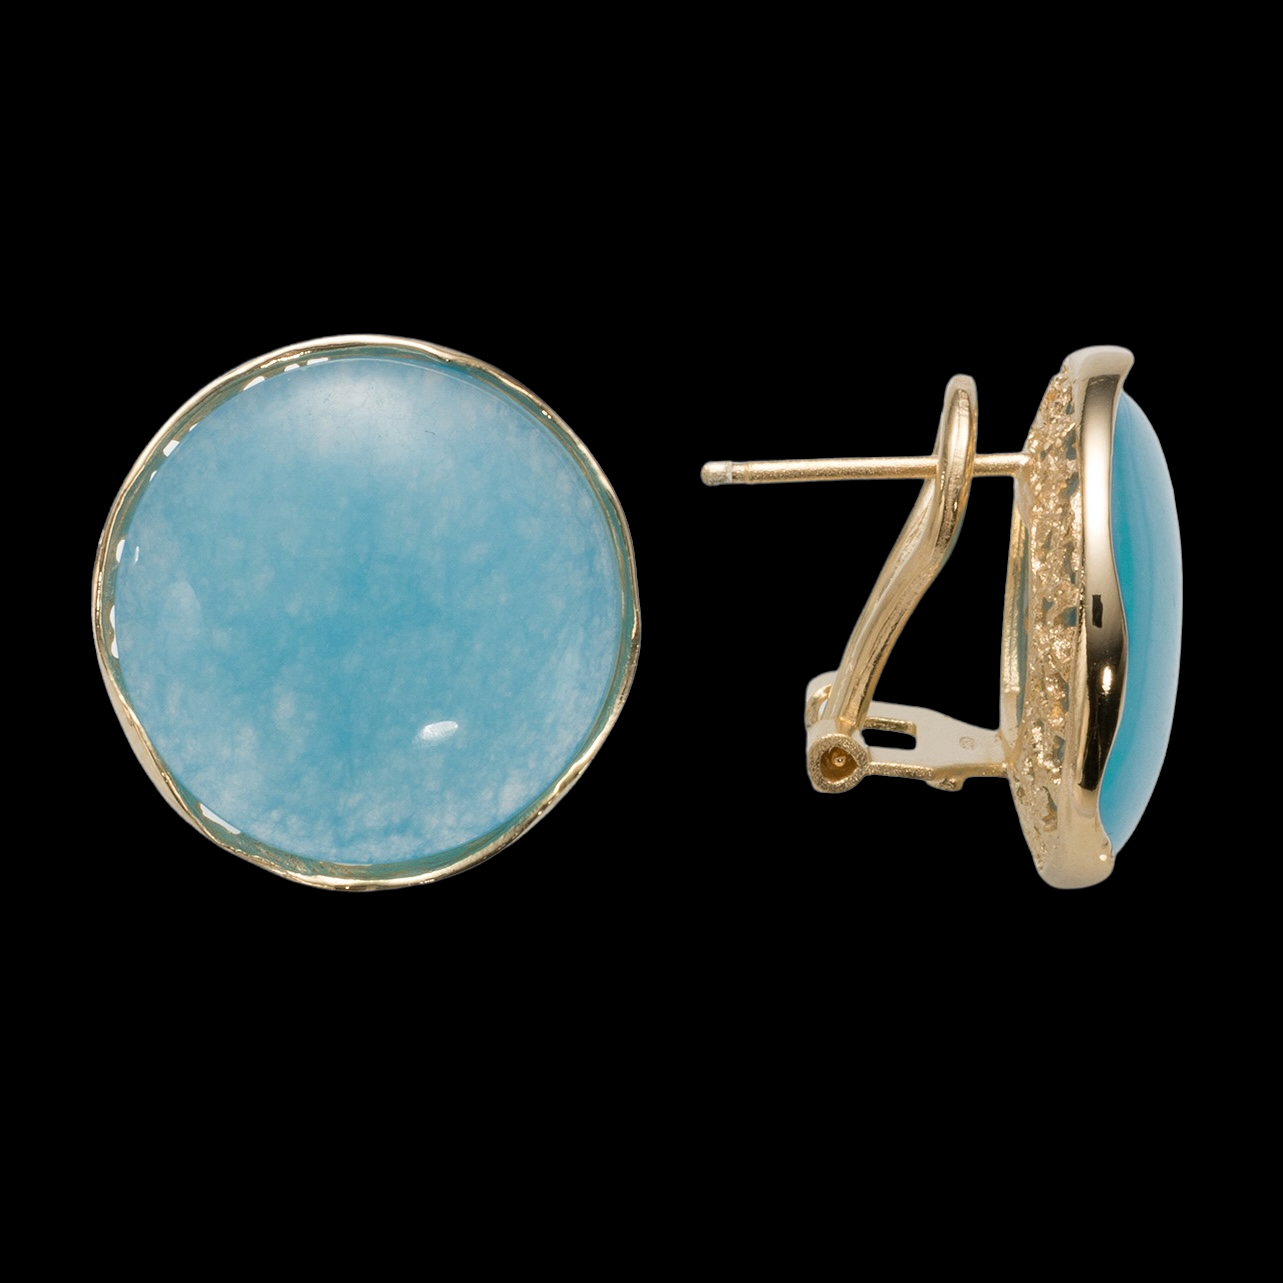 Gold plated round earrings with a blue quartz stone